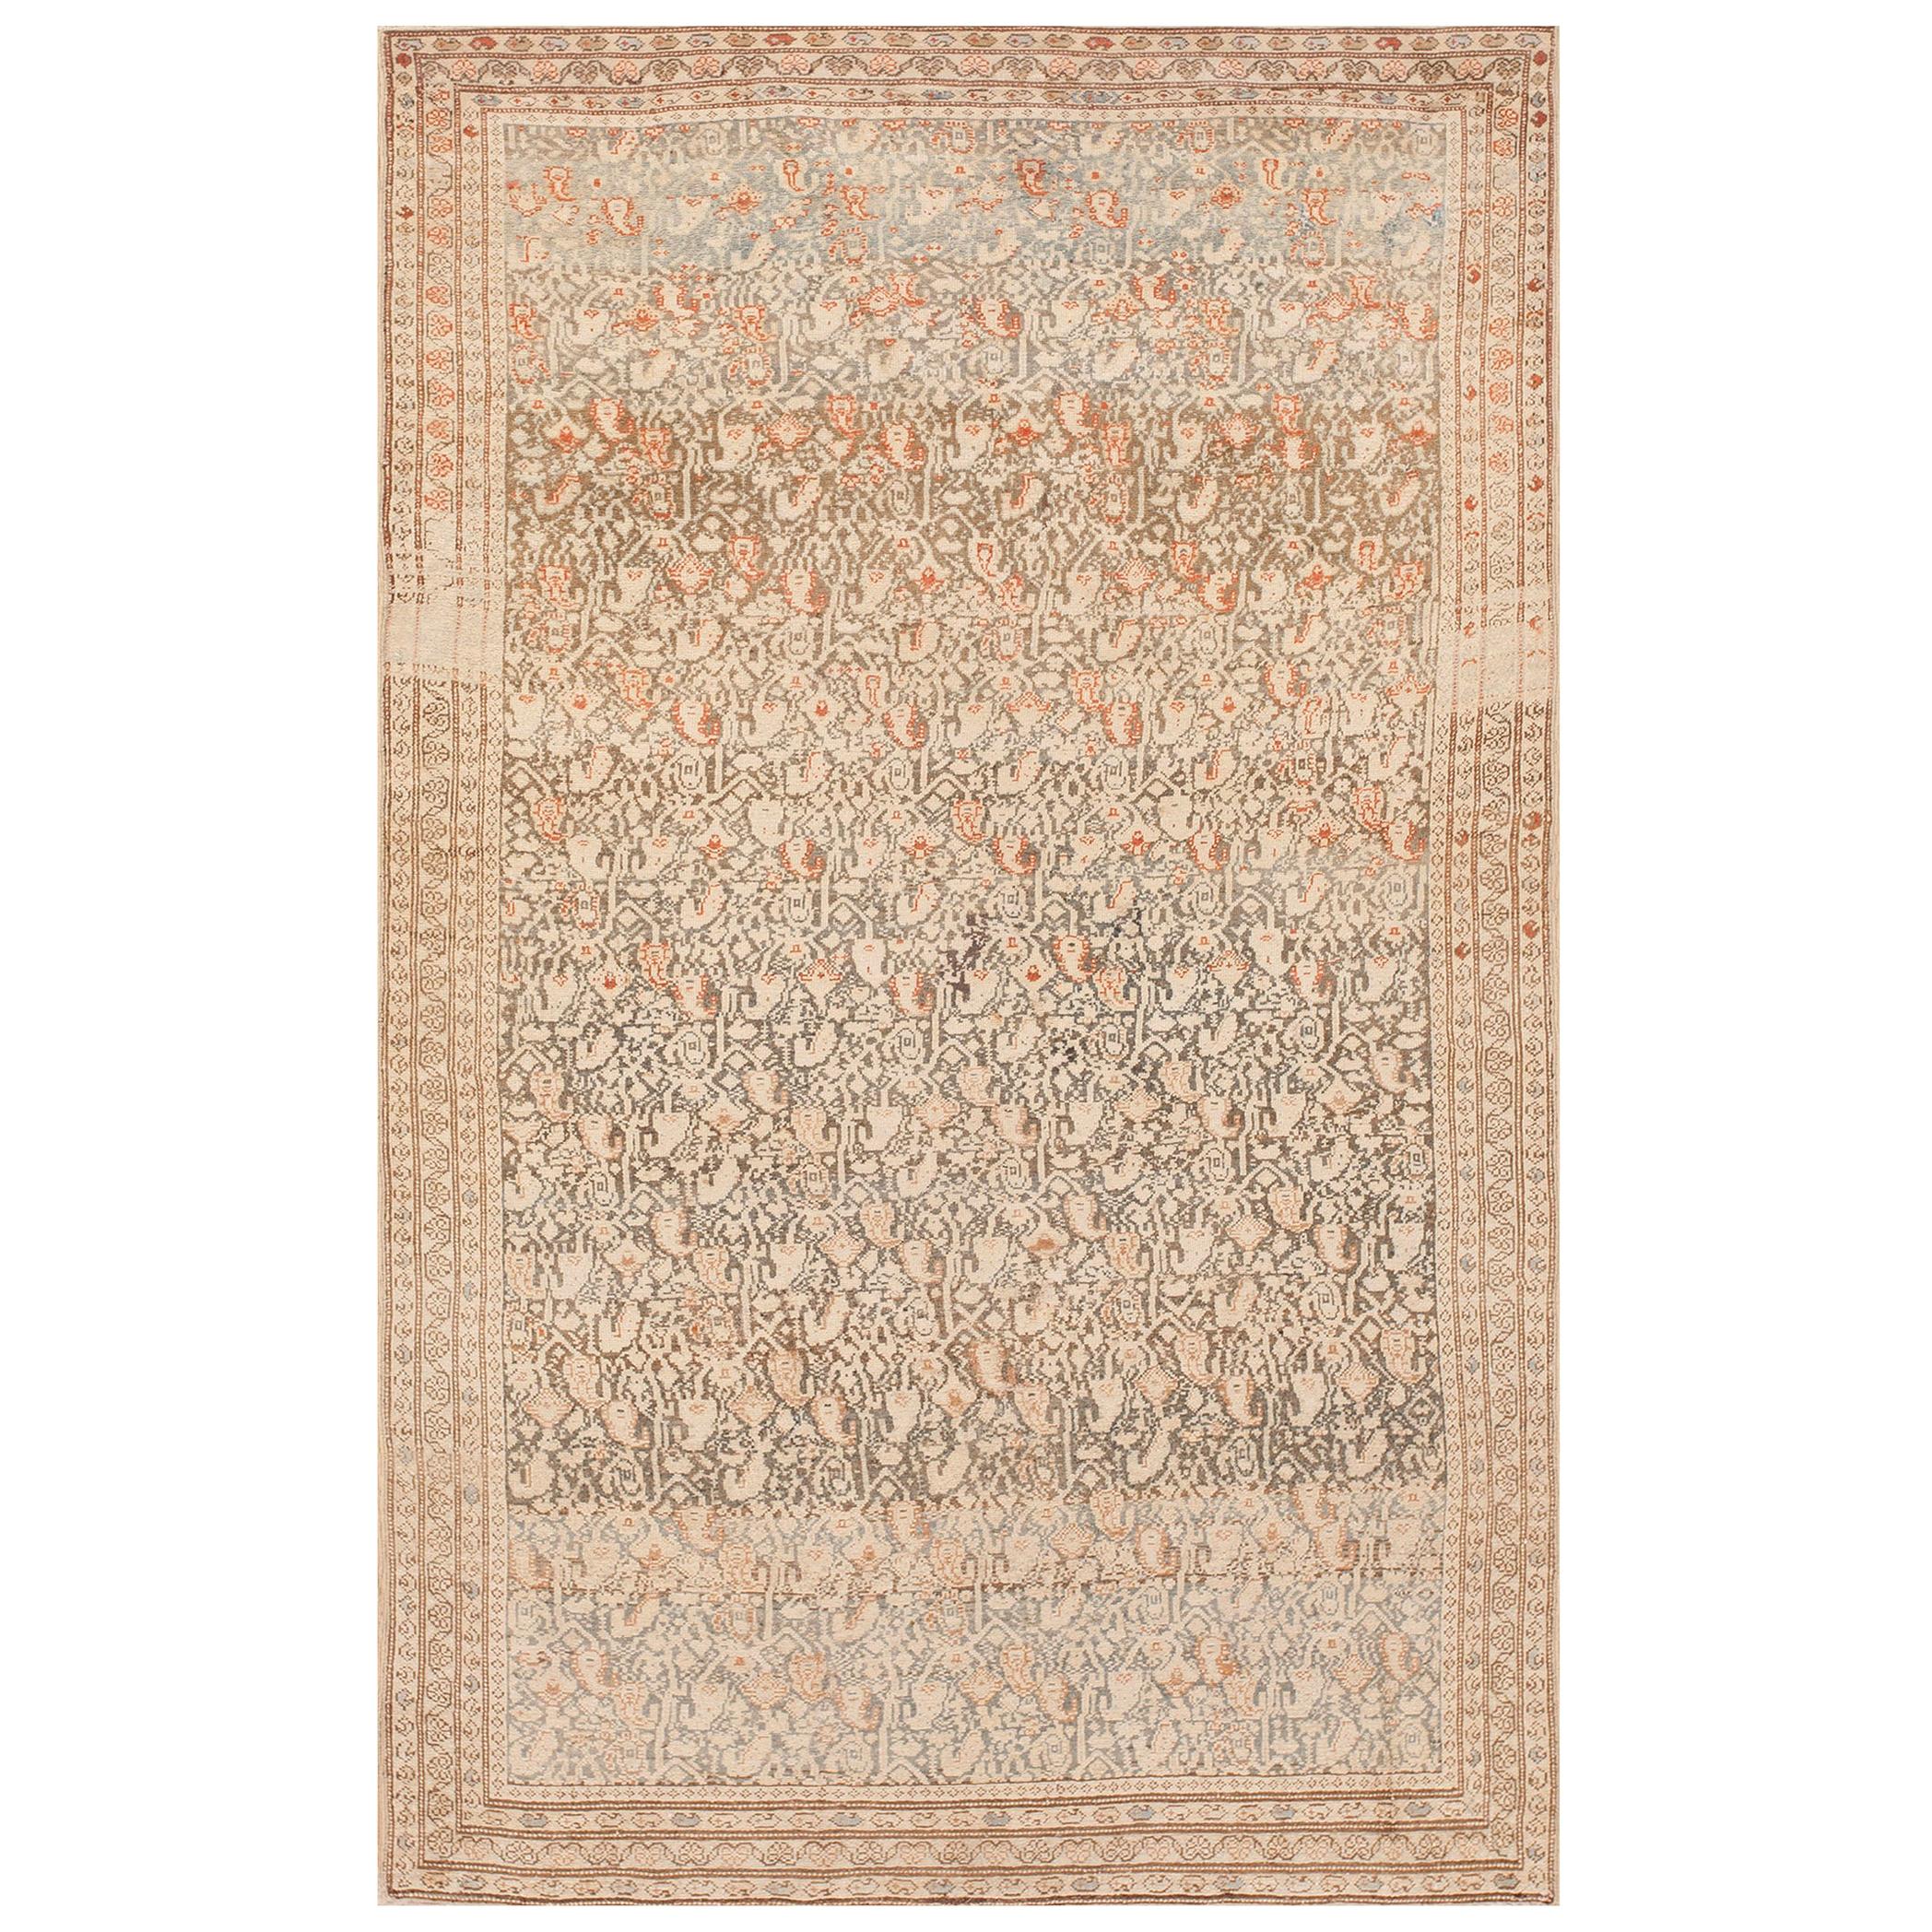 Early 20th Century Persian Malayer Carpet ( 4' x 6'4" - 122 x 193 ) For Sale